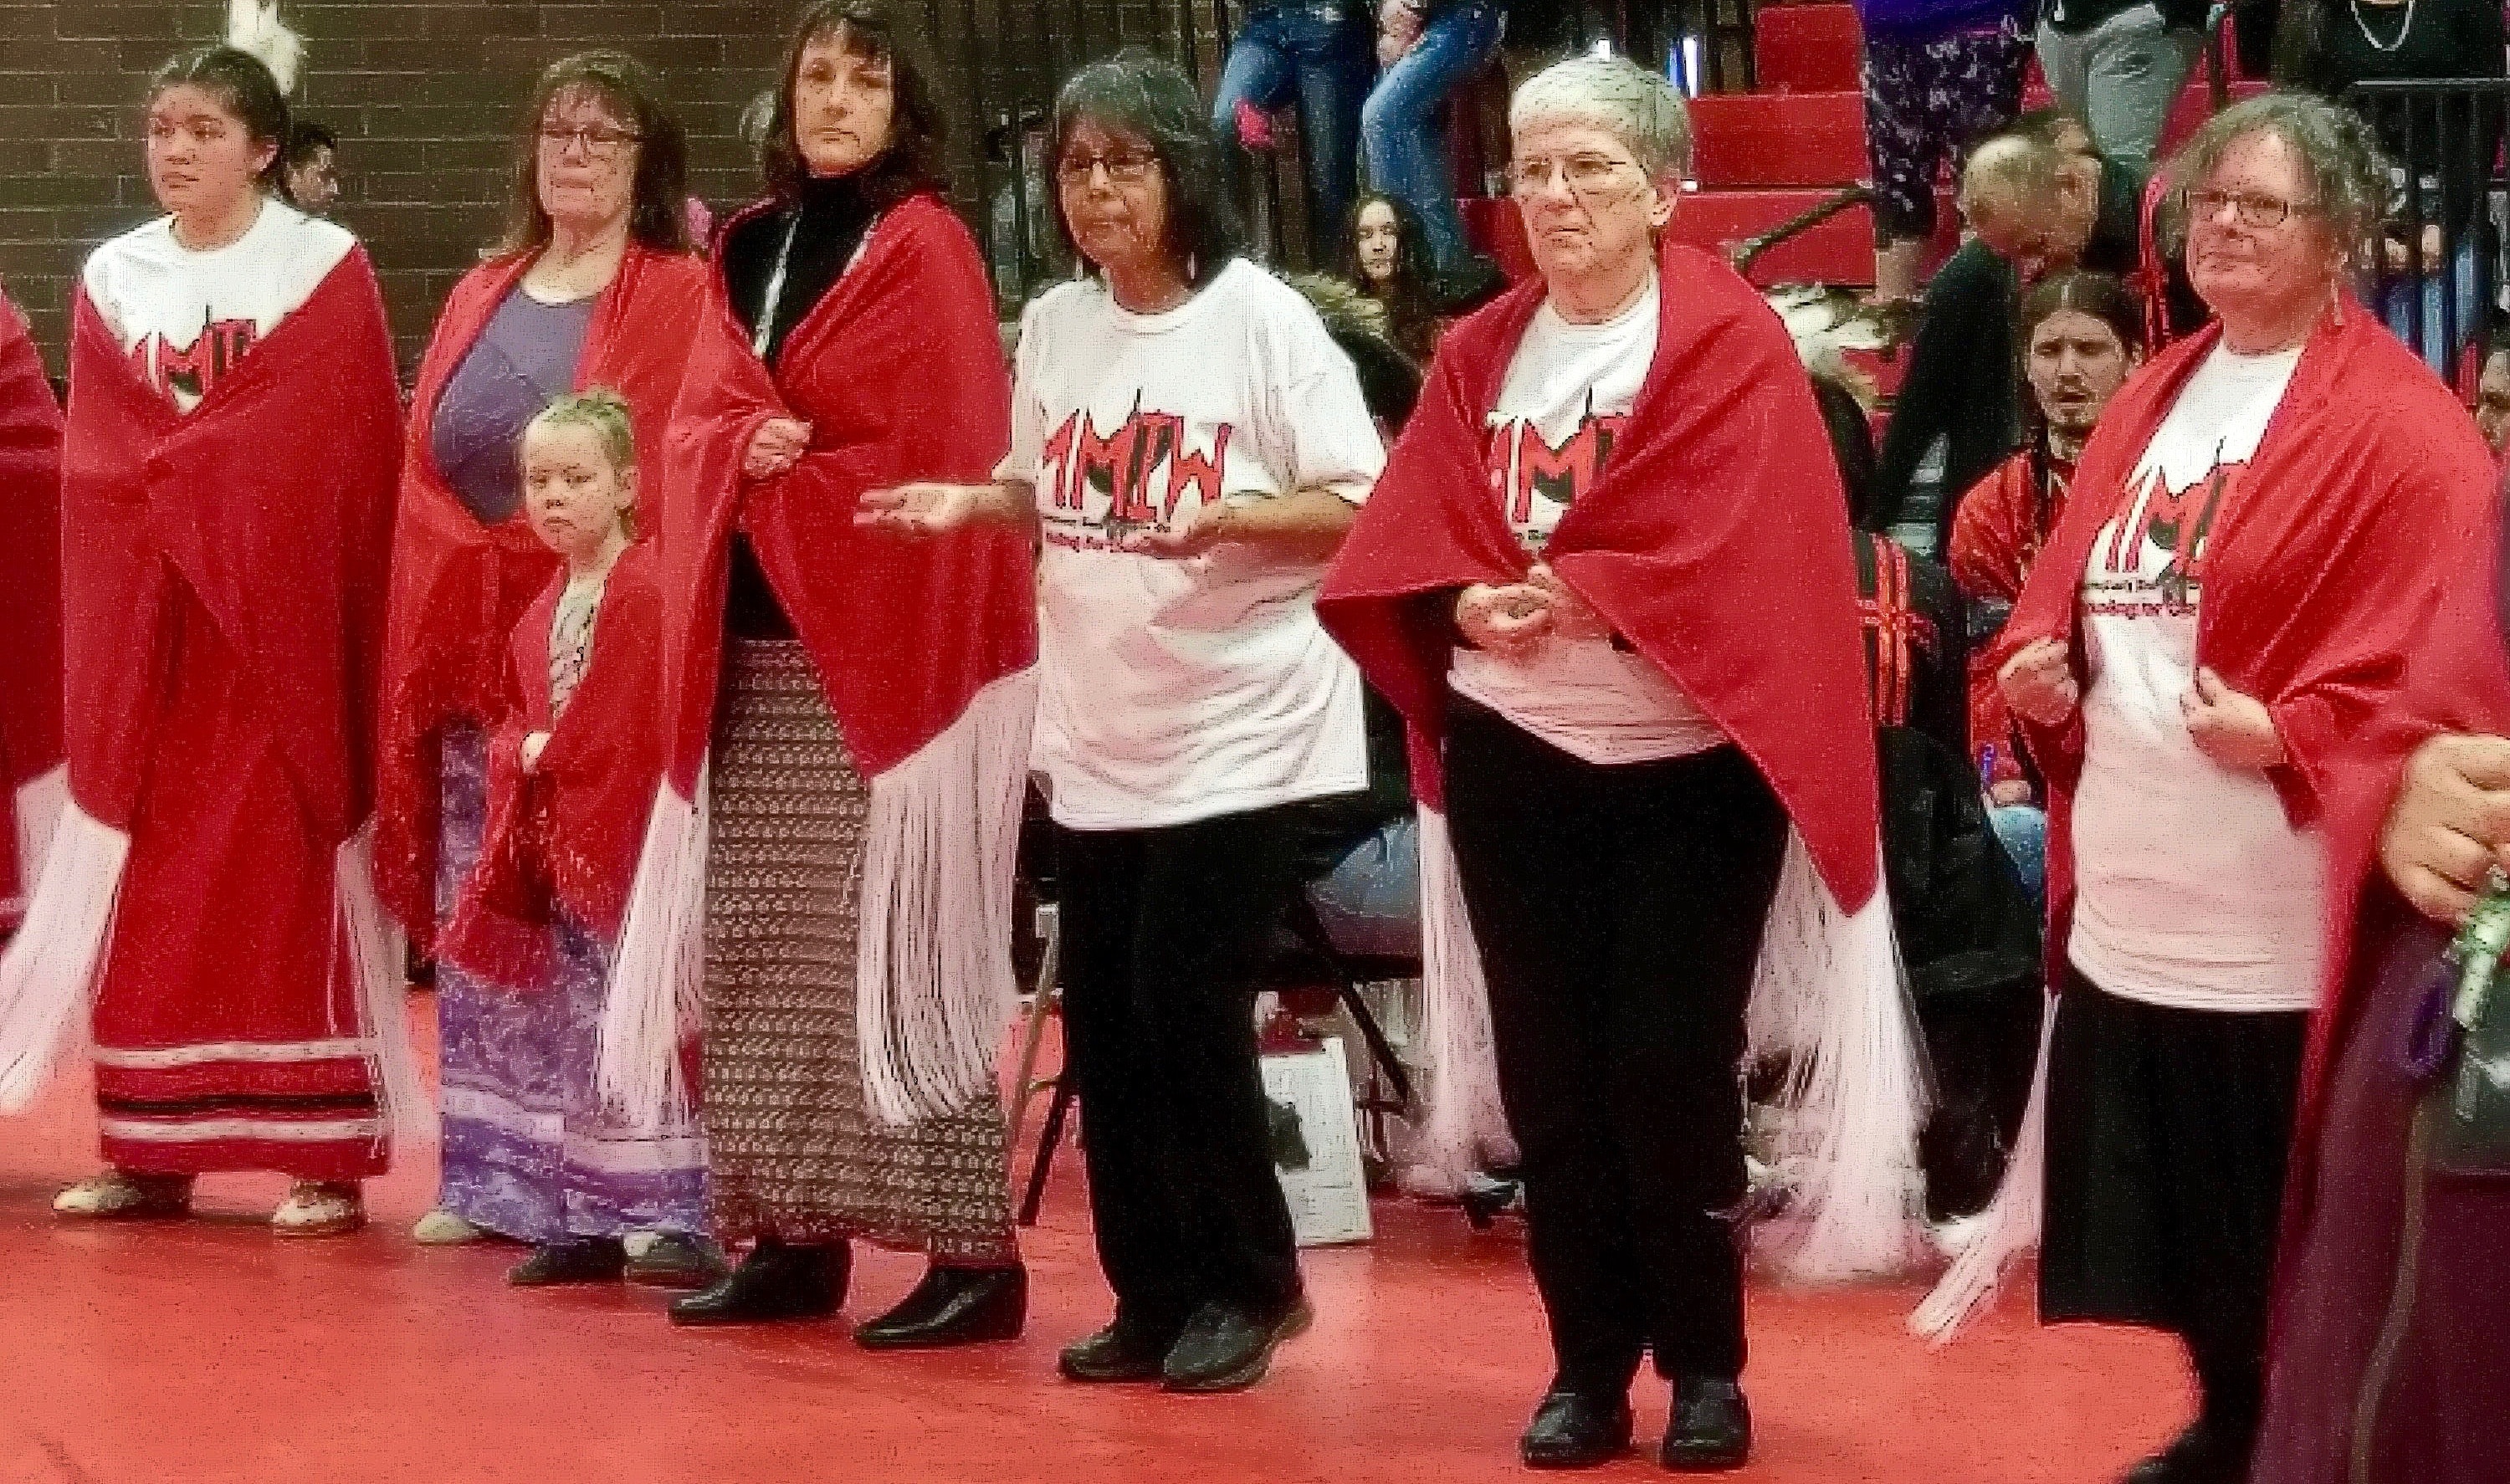 Women from Morningside United Methodist Church in Salem, Oregon, wear red shawls they helped to create during a dance to honor murdered and missing indigenous women at Chemawa Indian Boarding School. Photo by A. Wolf.